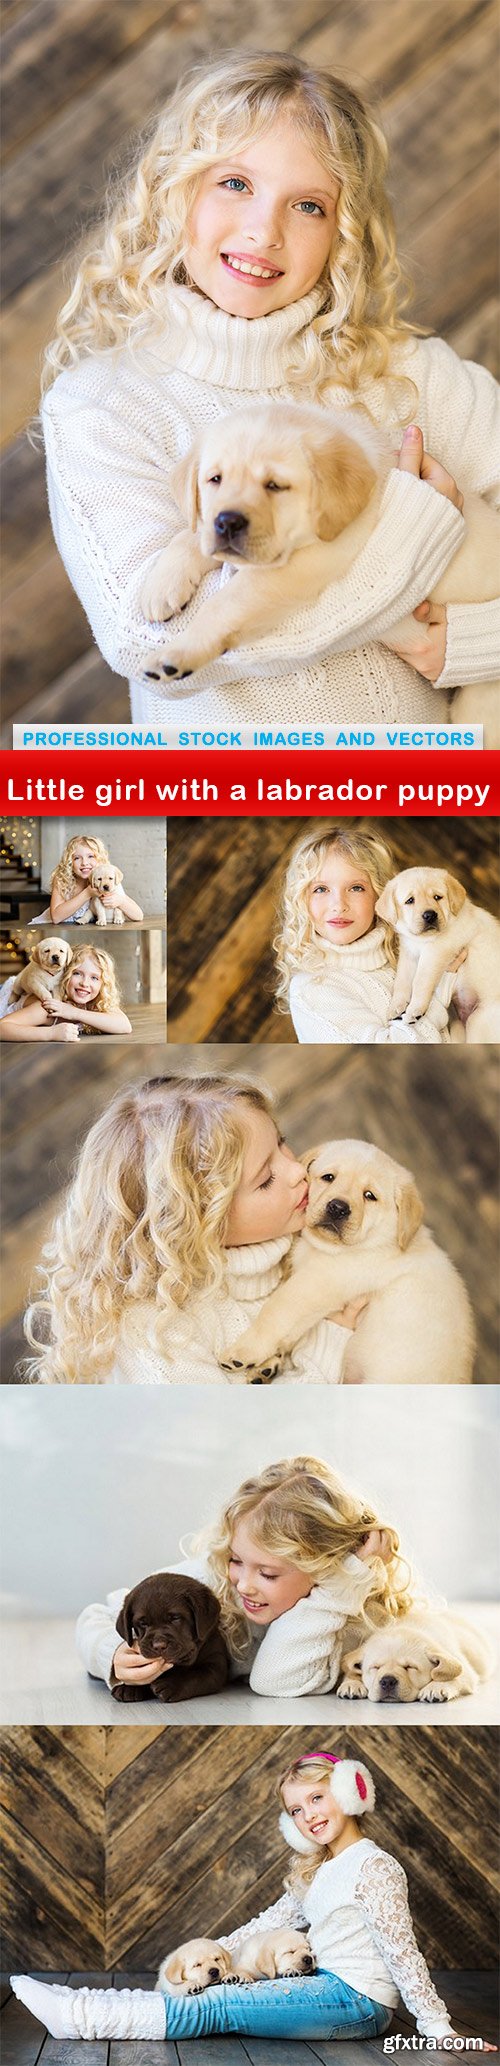 Little girl with a labrador puppy - 7 UHQ JPEG